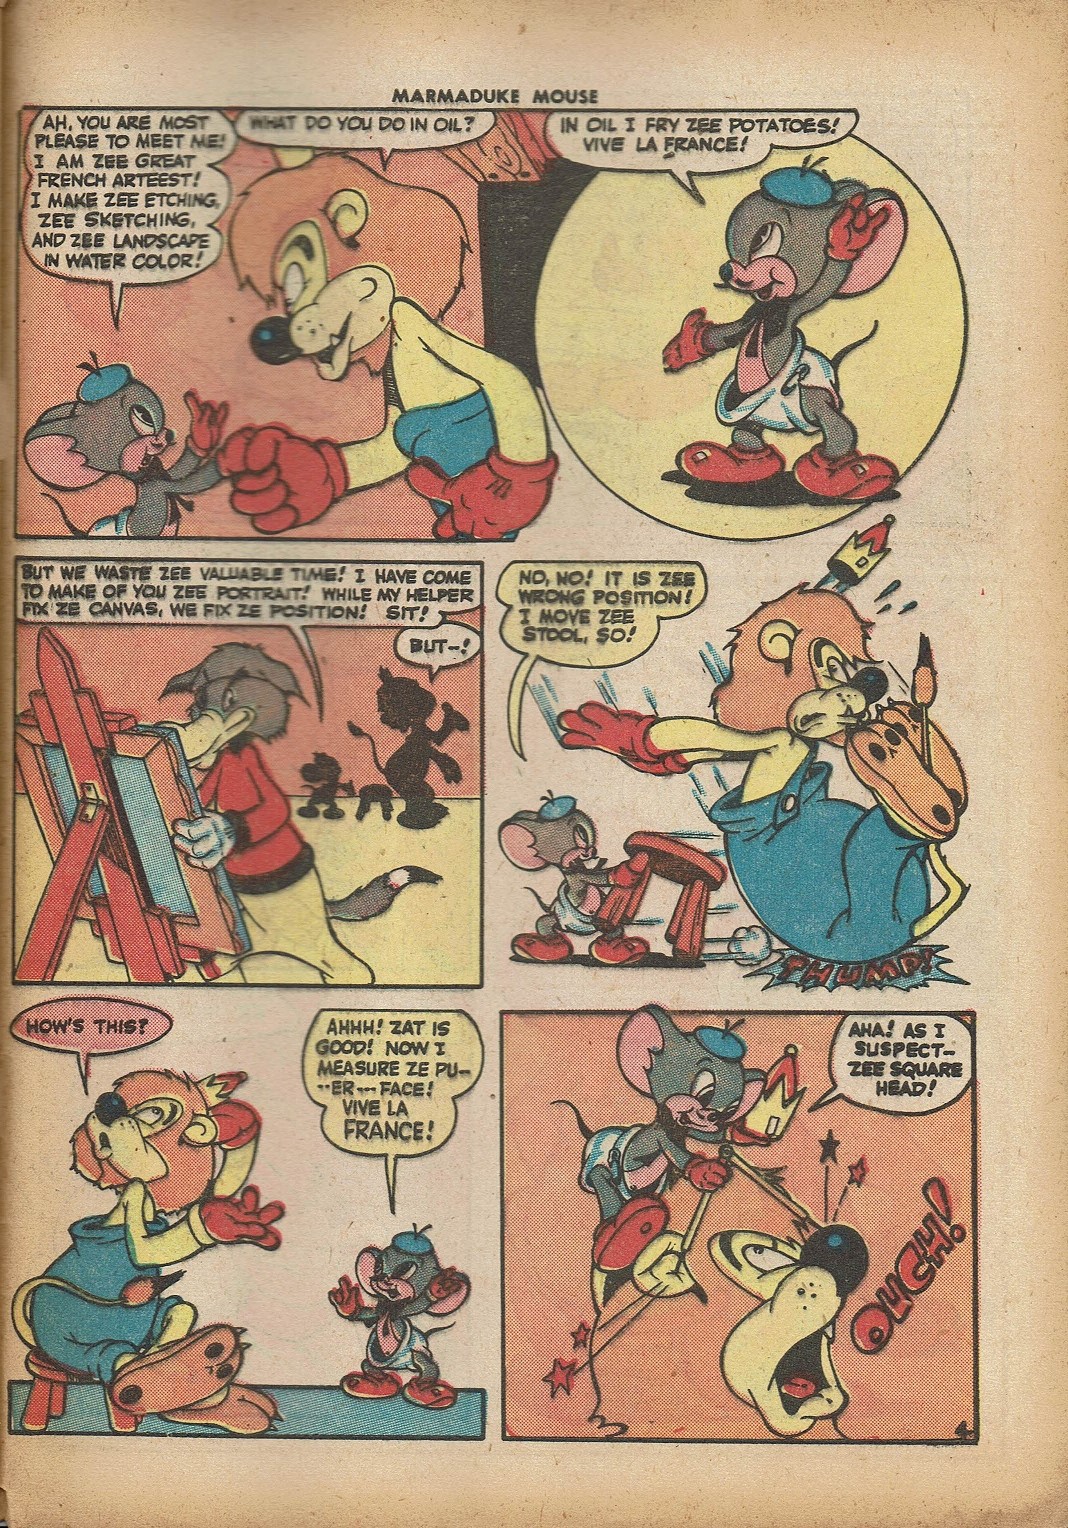 Read online Marmaduke Mouse comic -  Issue #2 - 47